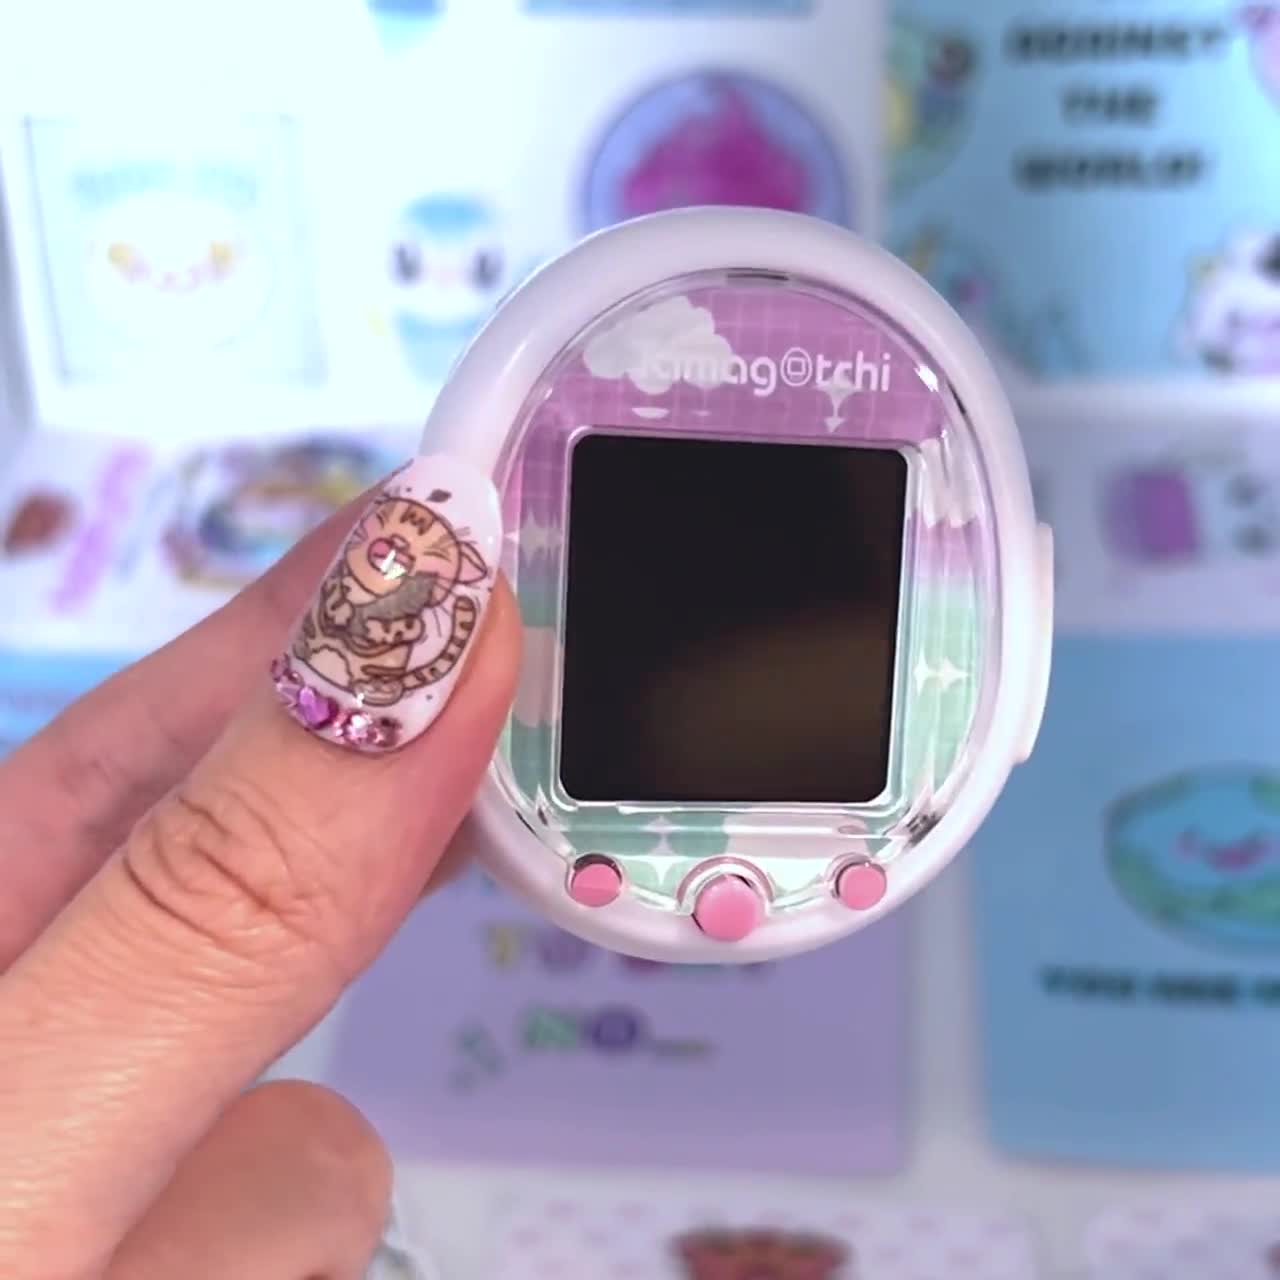 Tamagotchi Smart watch SANRIO Special set portable game New From Japan |  eBay